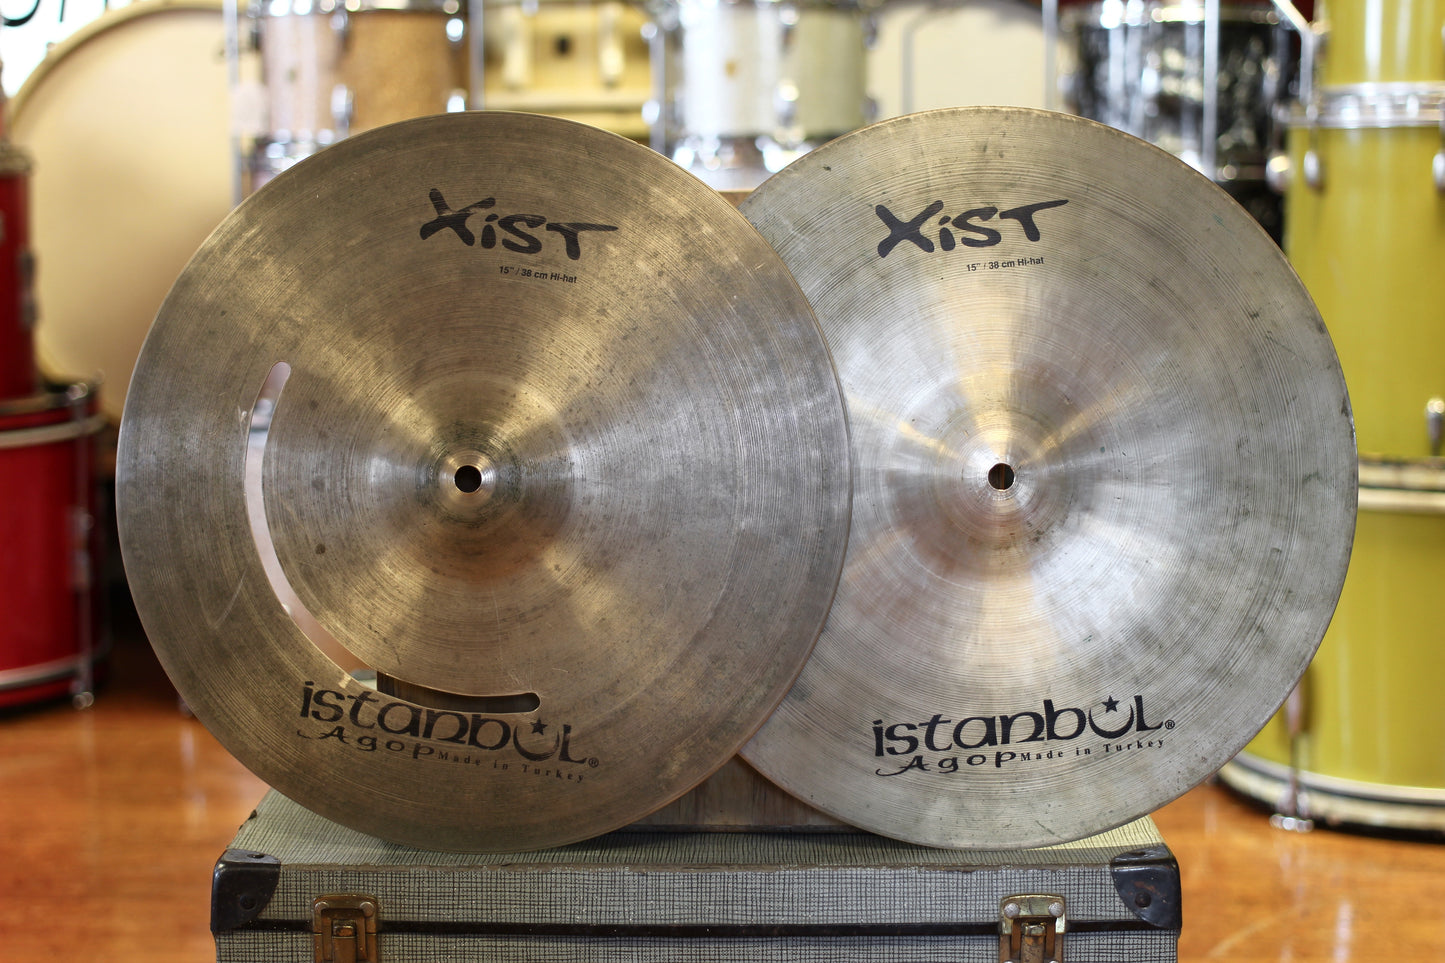 Used Istanbul Agop 15" Early Xist Hi-Hat Cymbals 1085/1315g